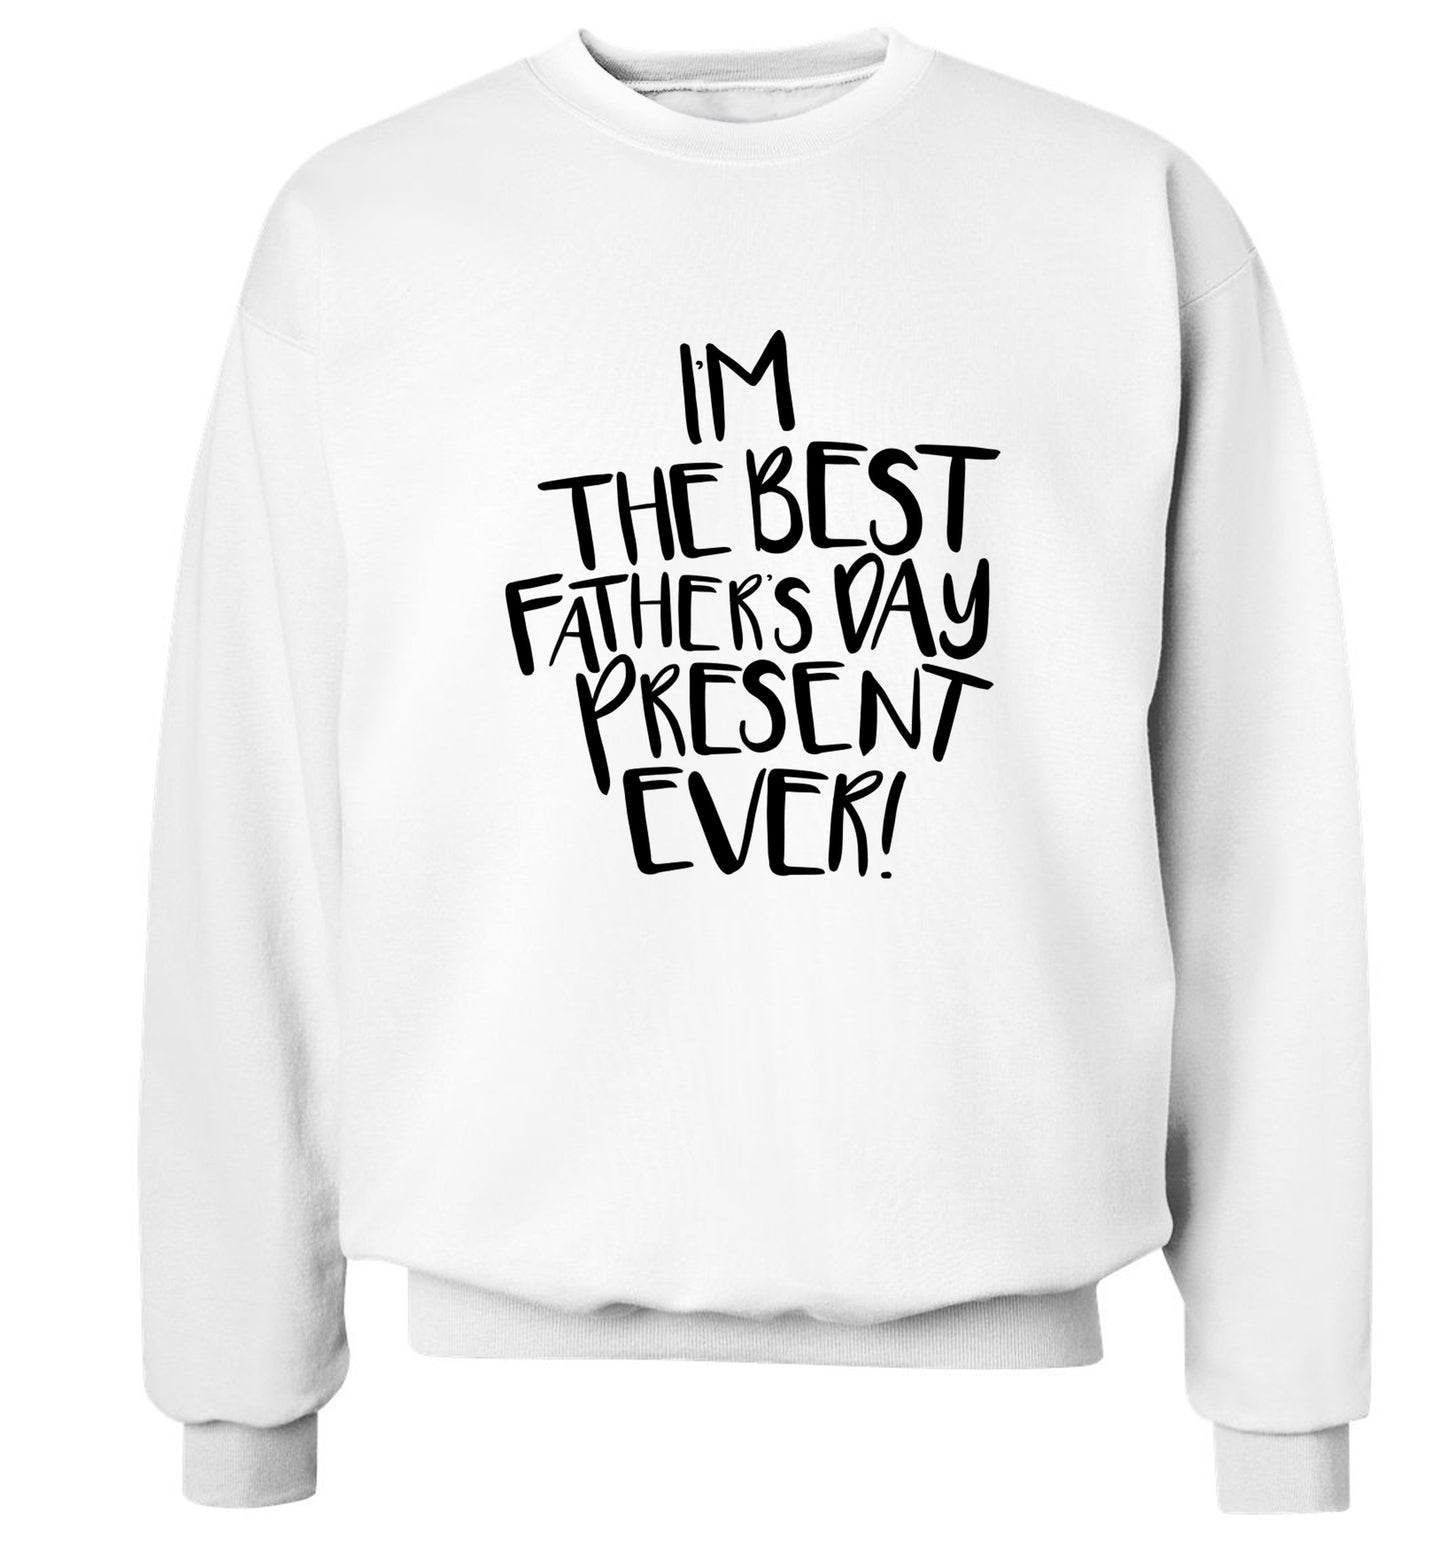 I'm the best father's day present ever! Adult's unisex white Sweater 2XL